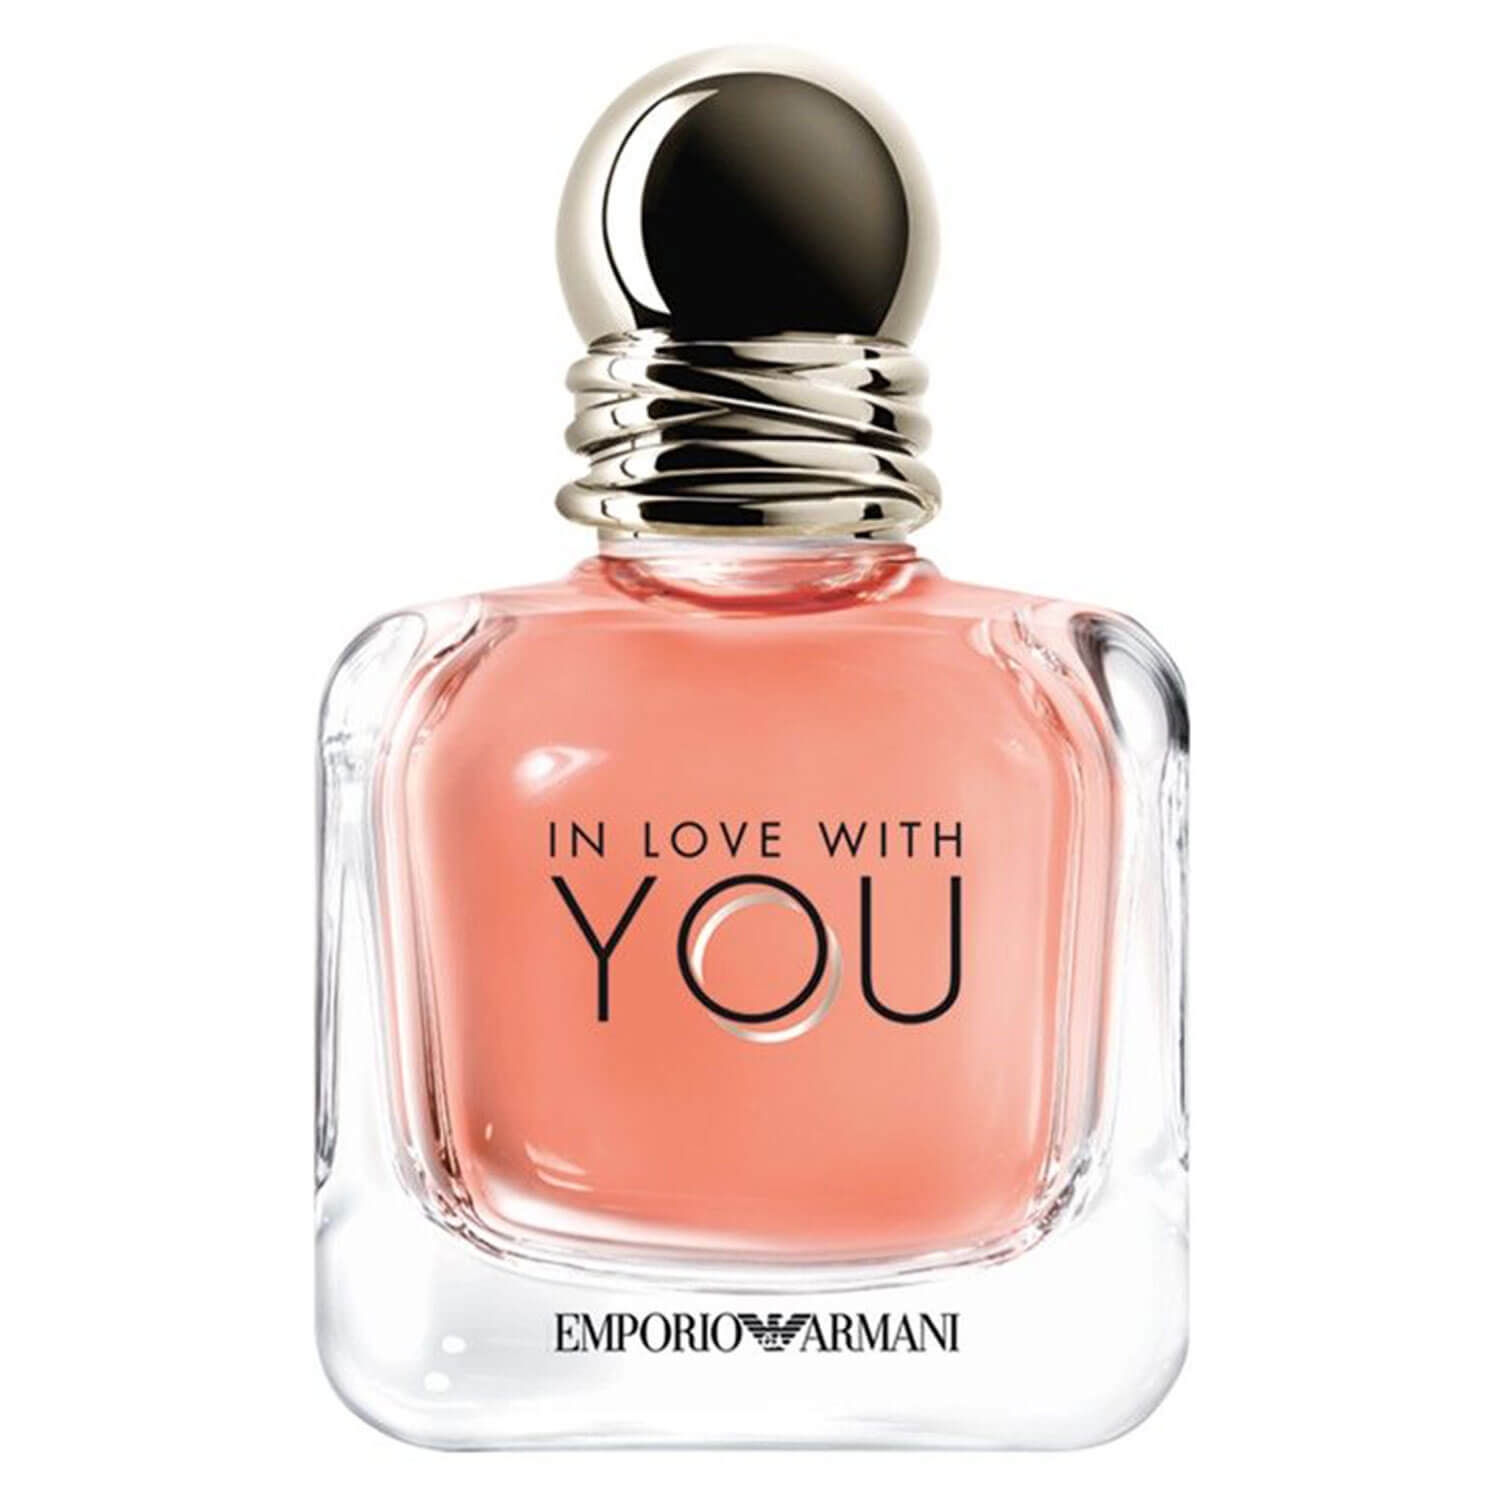 Product image from Emporio Armani - In Love With You Eau de Parfum